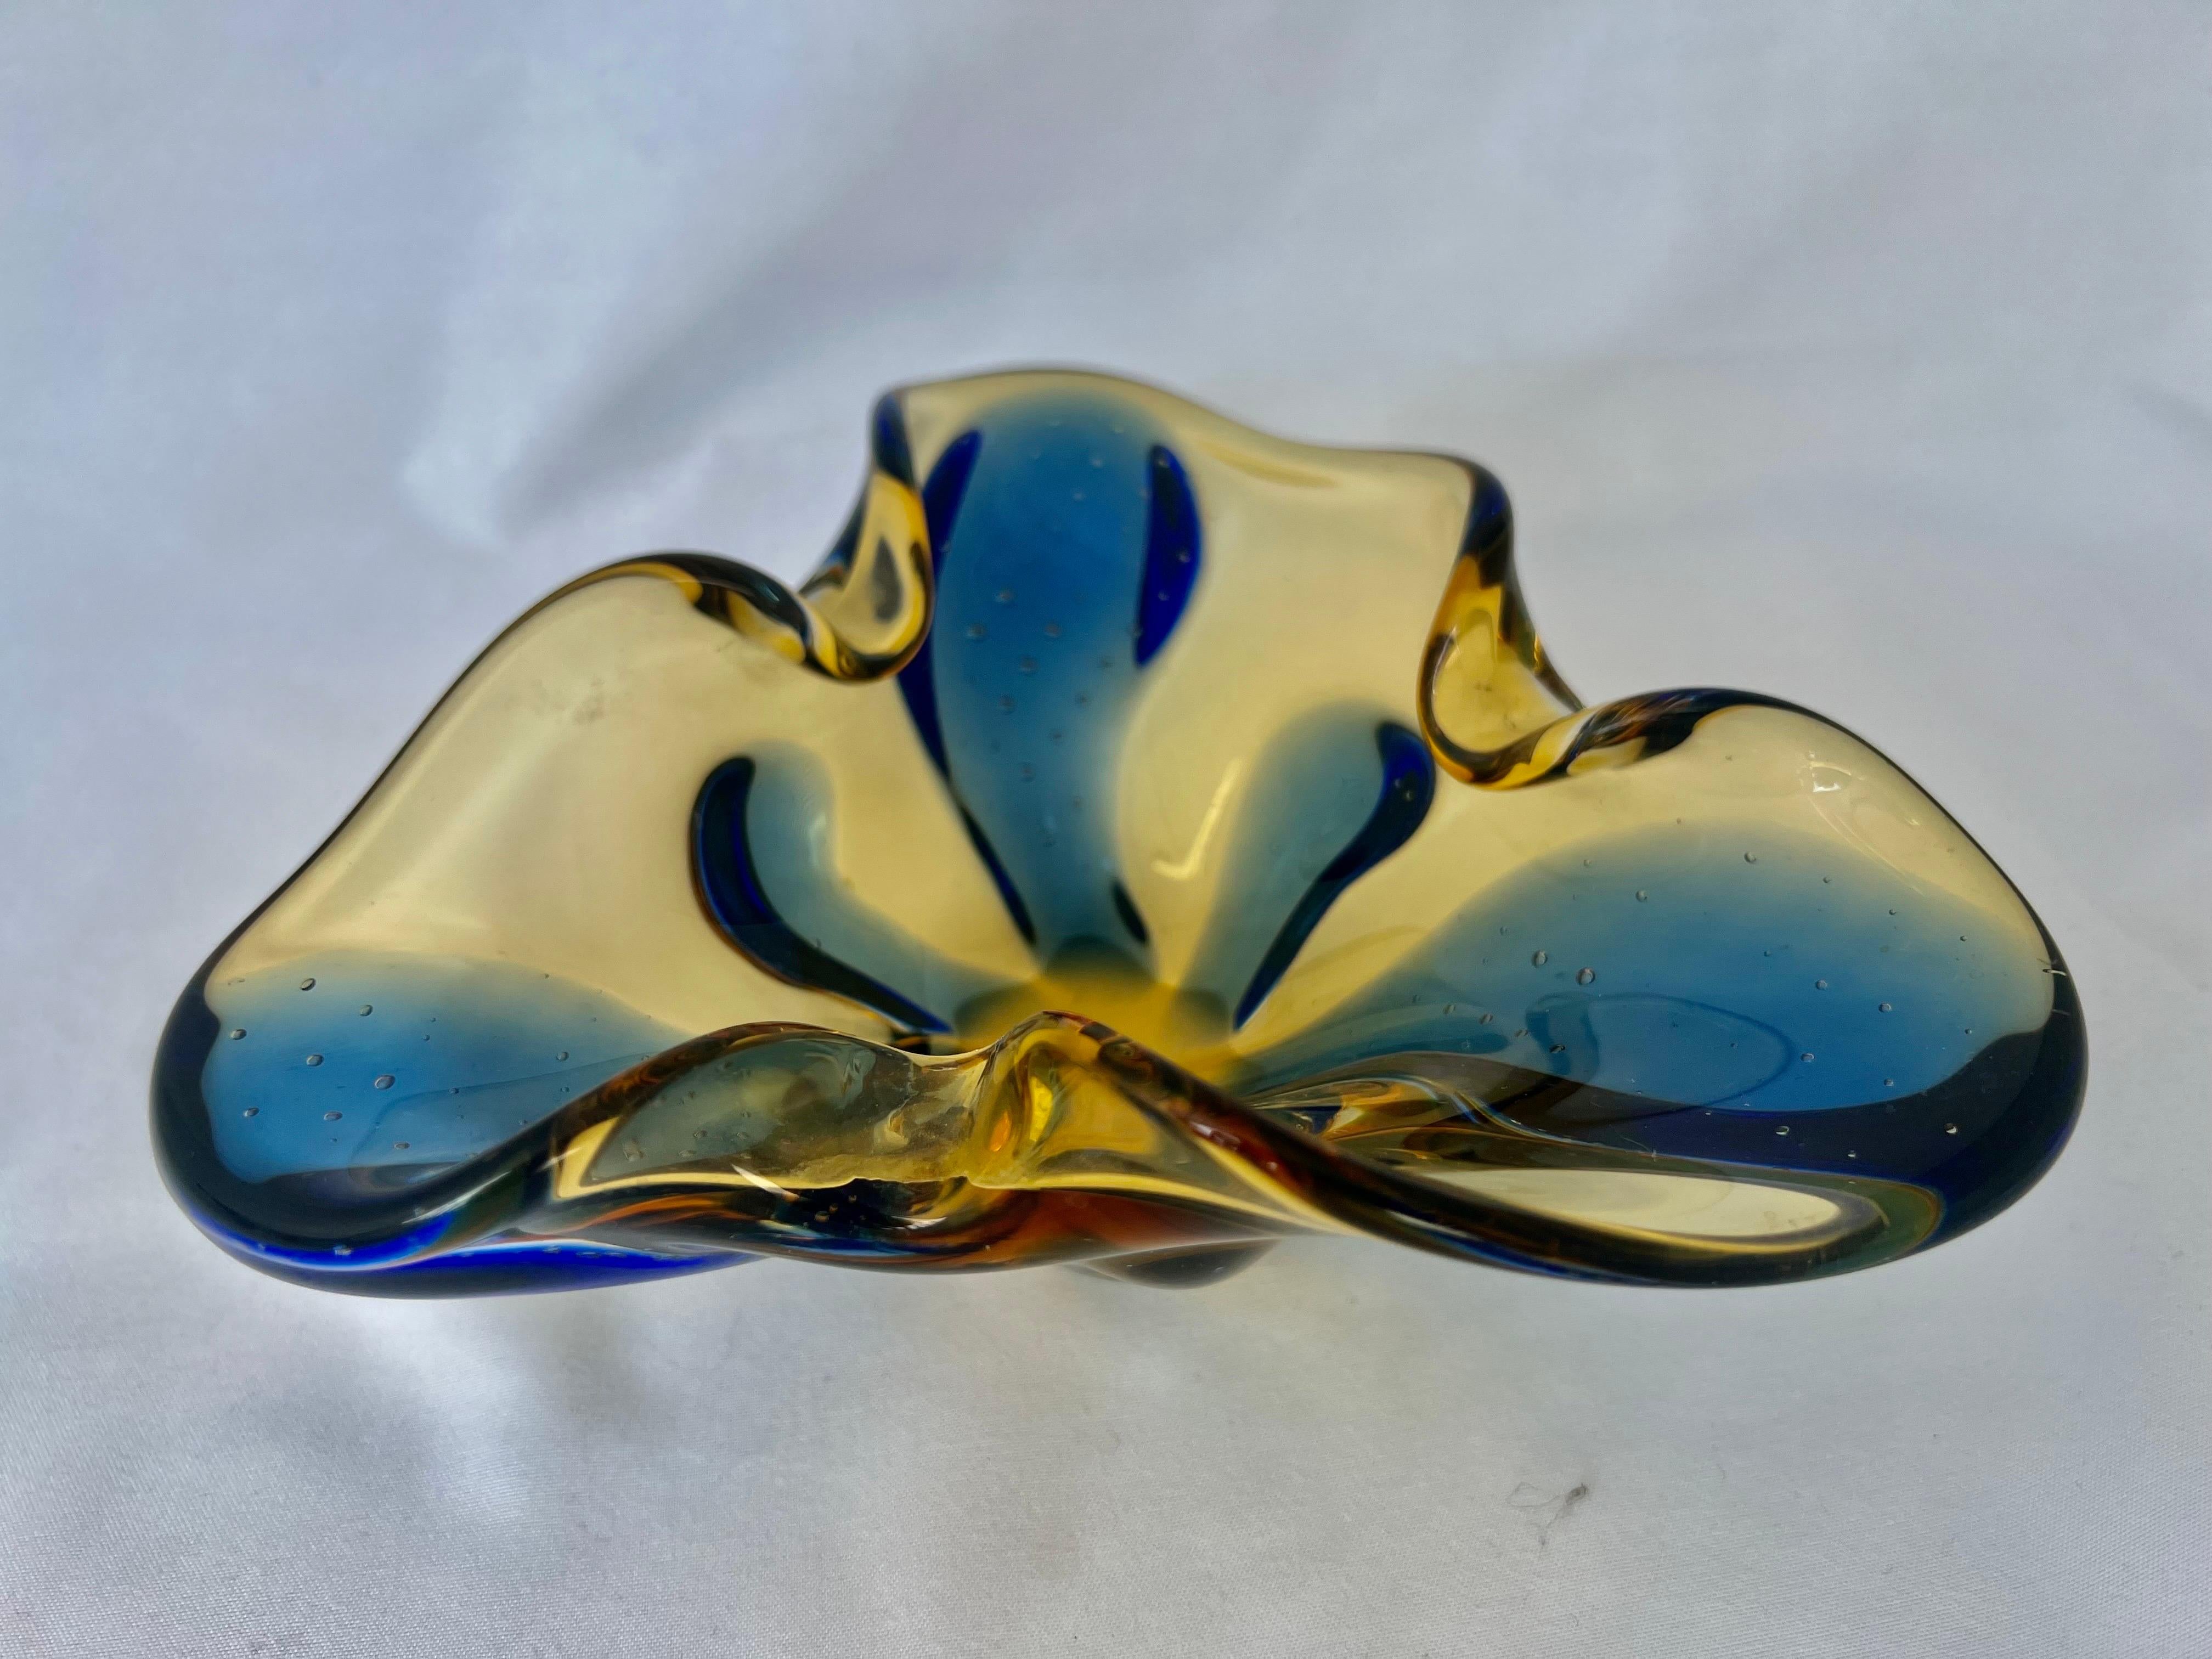 Italian hand blown yellow & blue glass dish.This small piece of art glass looks beautiful on a pile of books. I adds a great pop of color in your decor.